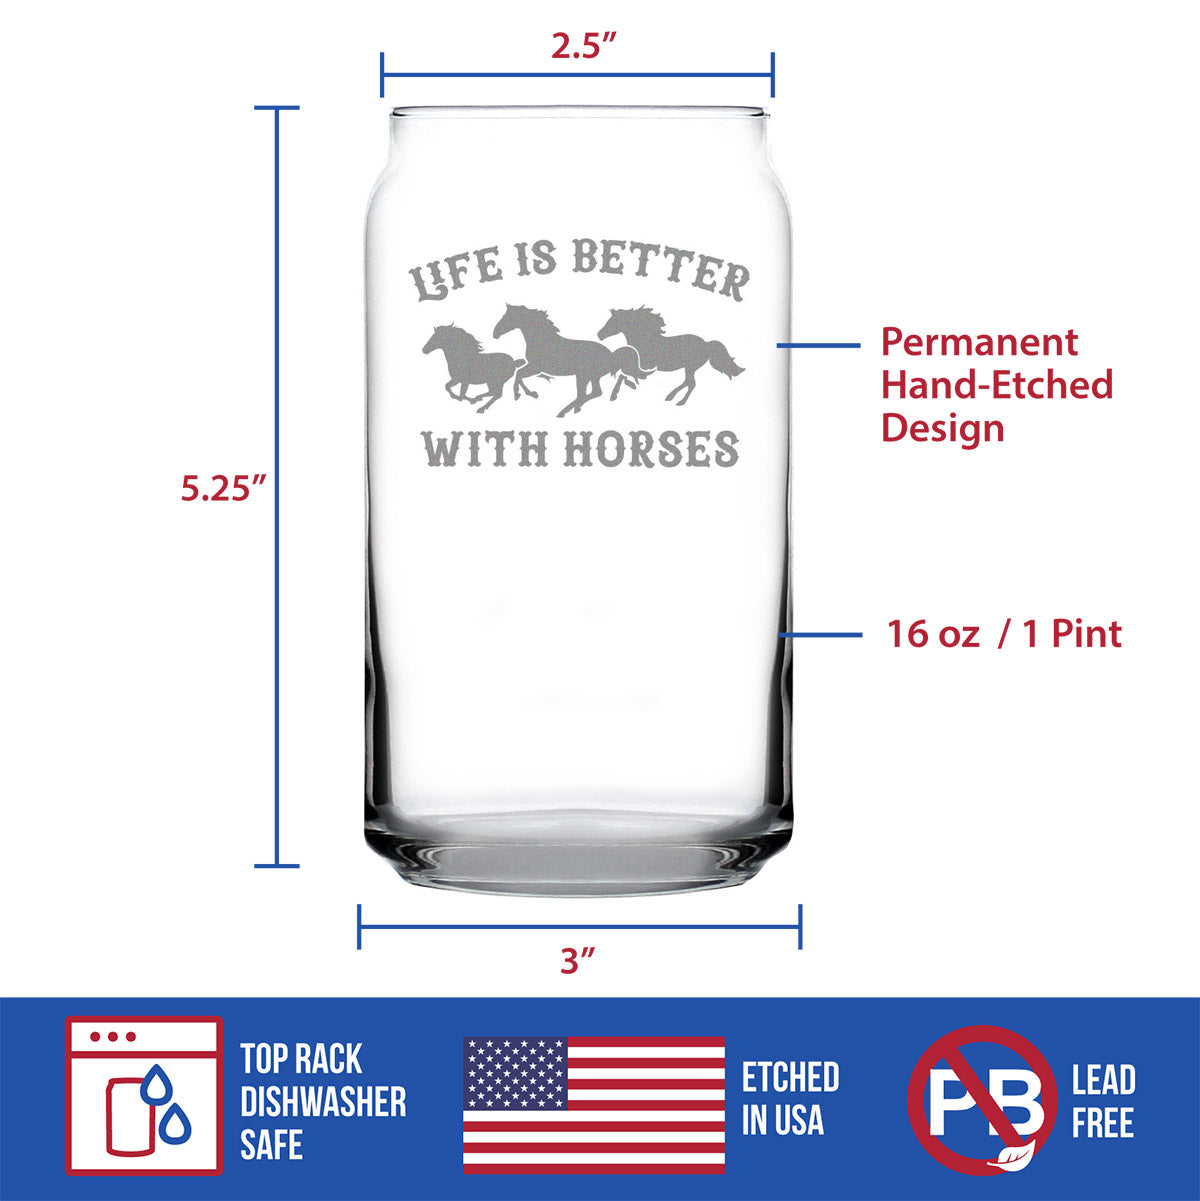 Buck the Rules - Funny Horse Pint Glass Gifts for Beer Drinking Men & -  bevvee